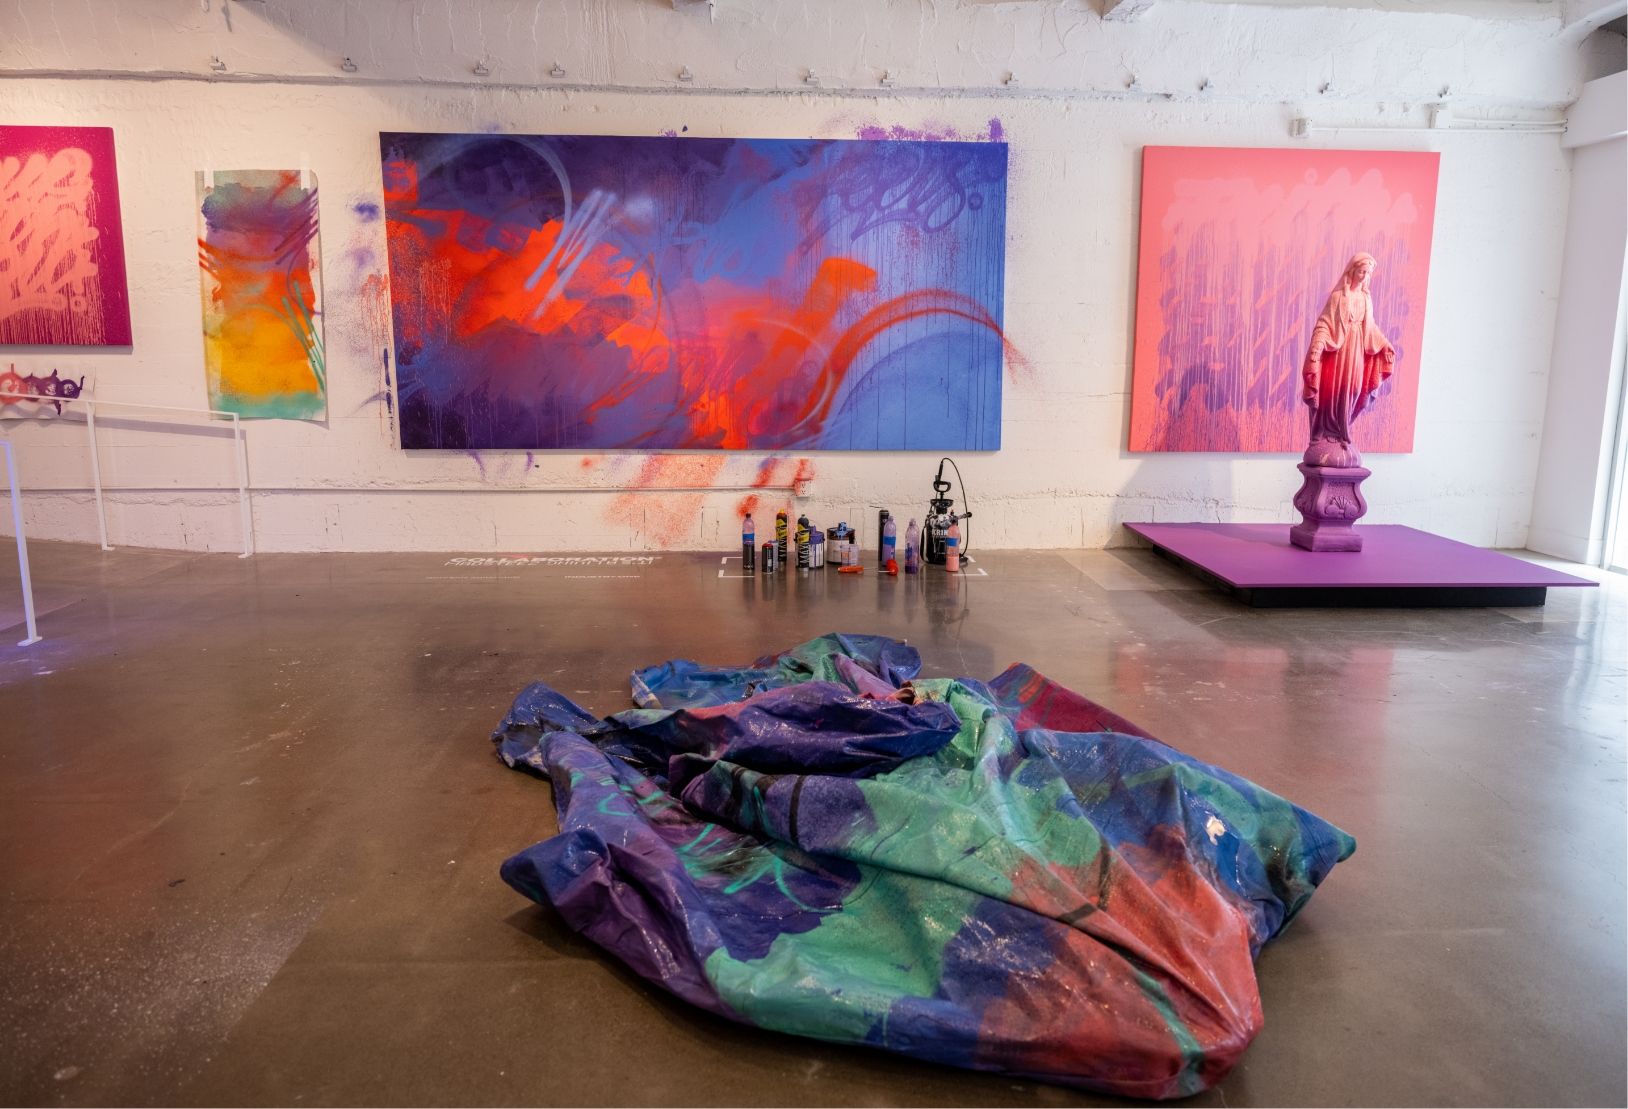 painted tarp sculpture in middle of gallery floor, 4 paintings line the wall and a painted statue of virgin Mary